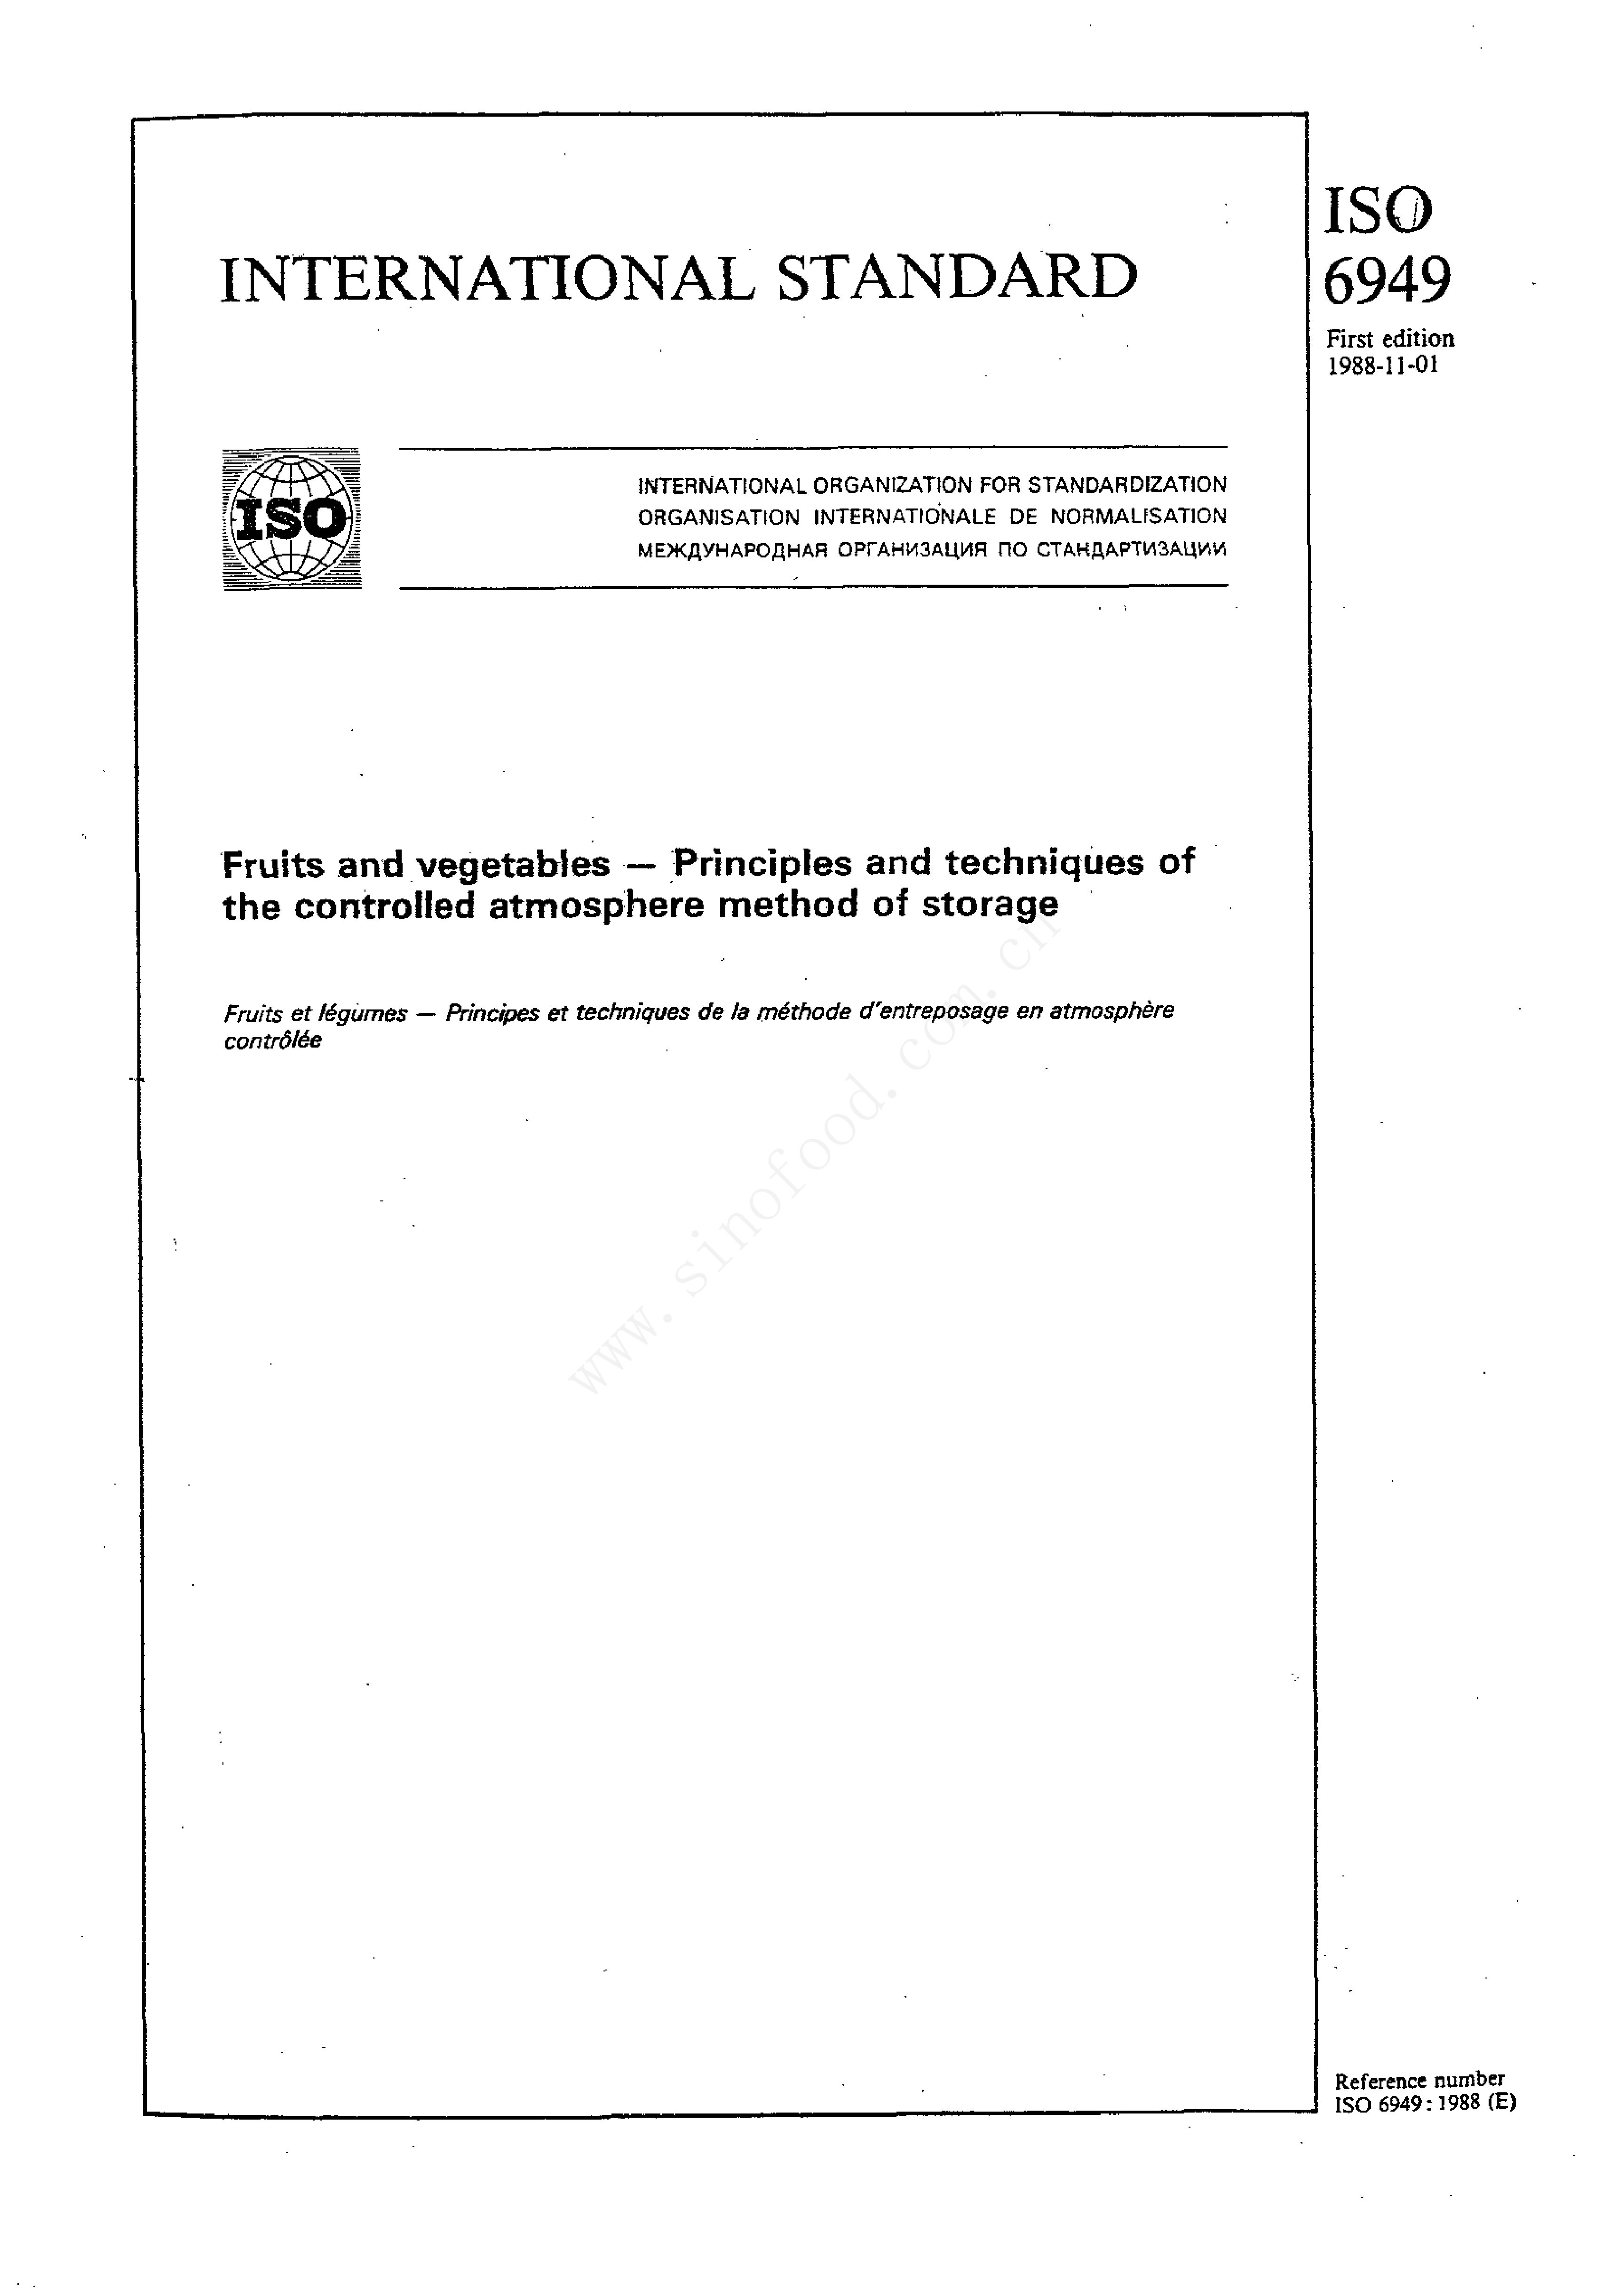 ISO 6949:1988